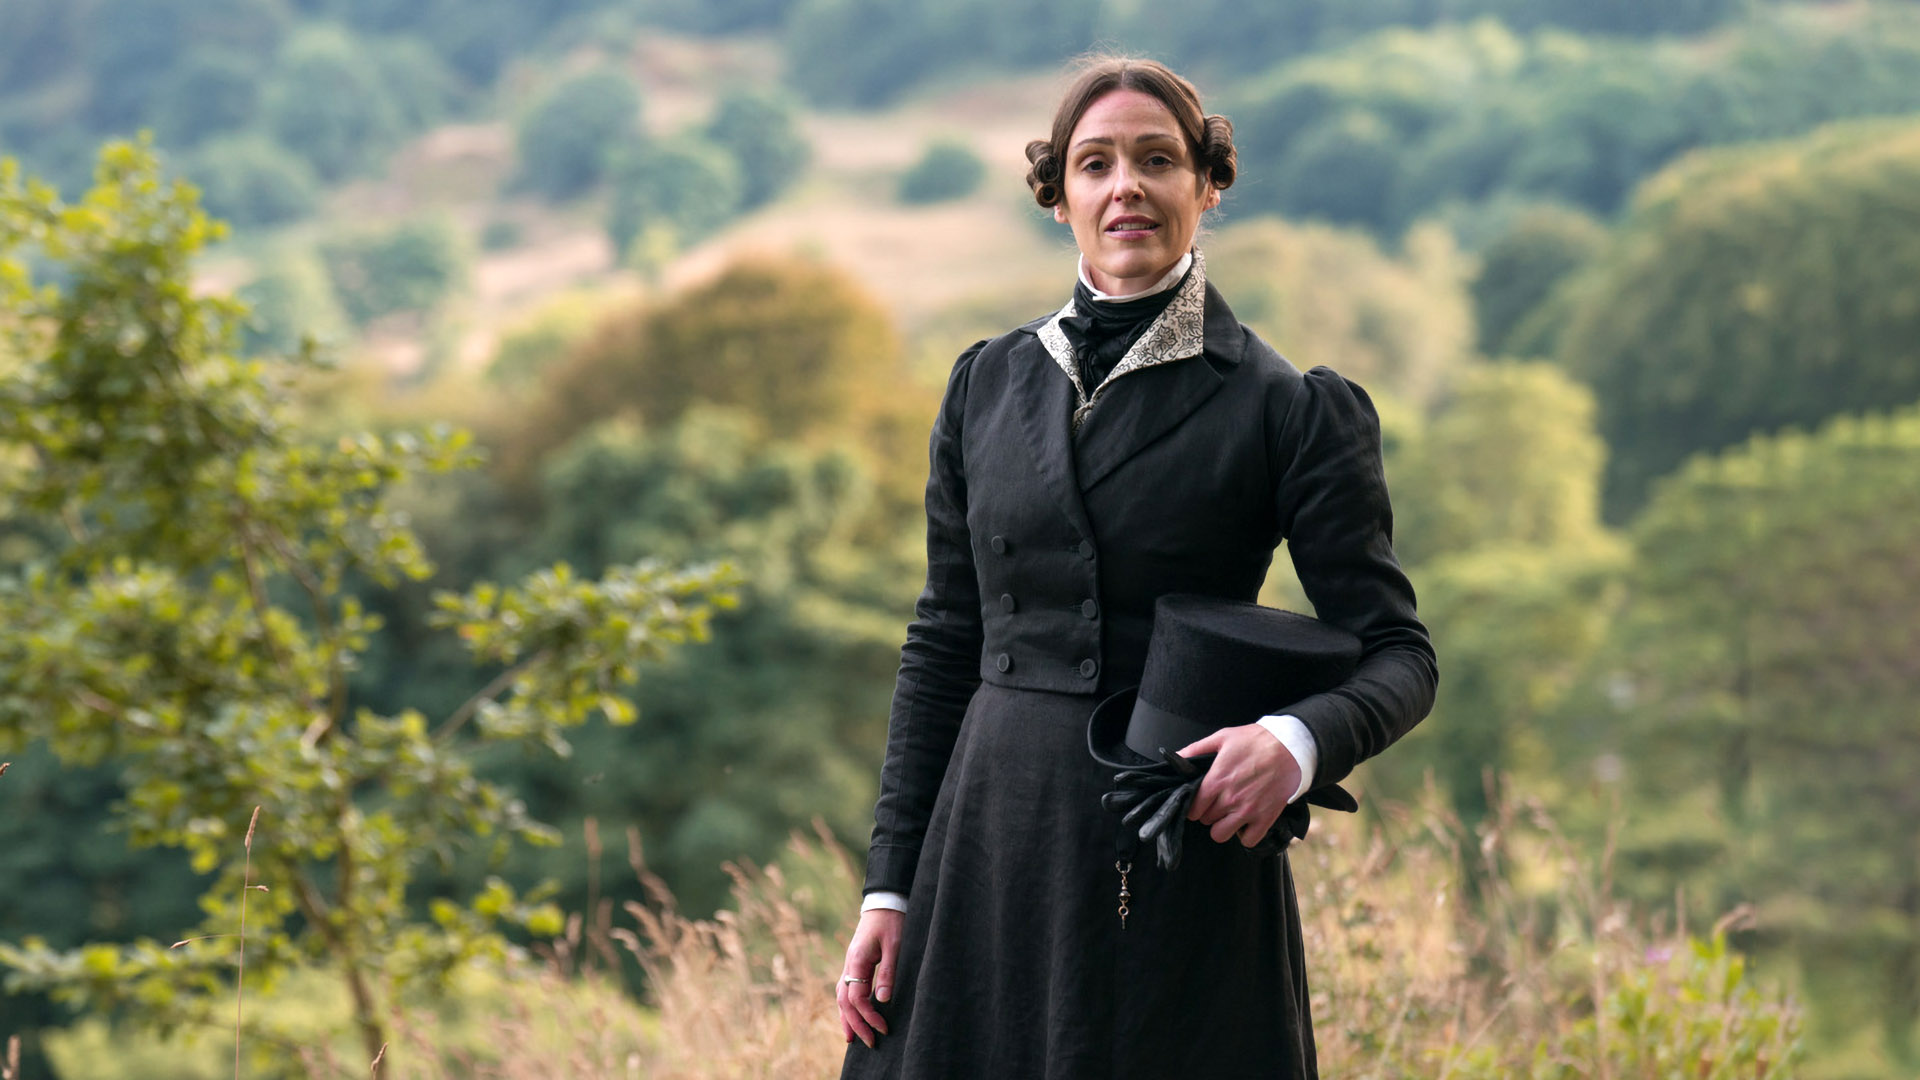 Looking For Your Next Binge? 6 Must-Watch Period Dramas, According to Reddit